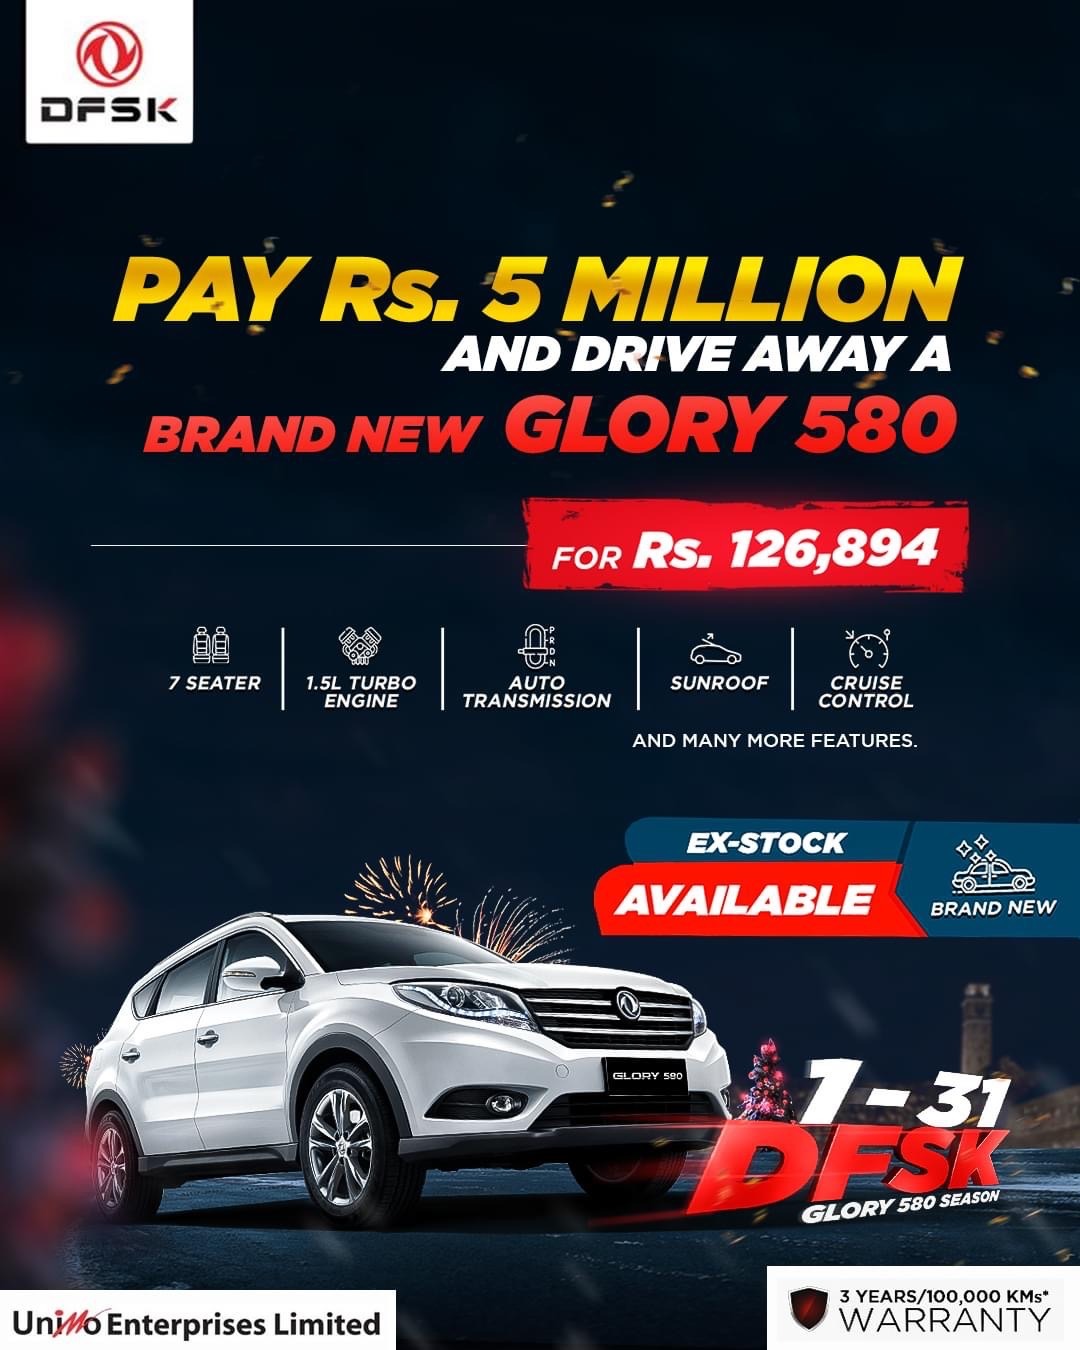 Image for Pay Rs. 5 Million and Drive away a Brand new Glory 580